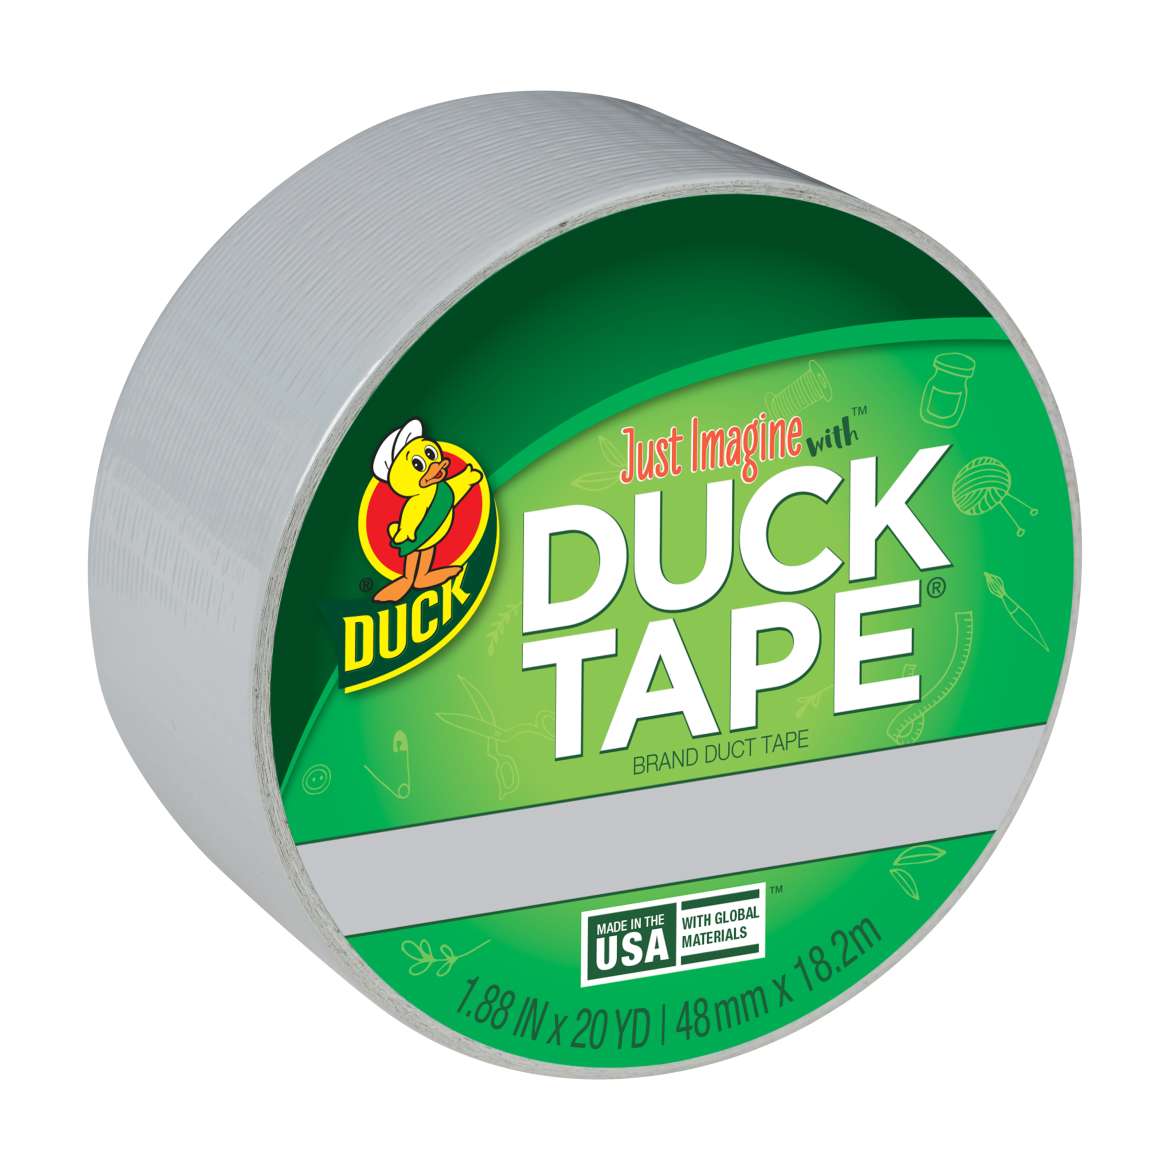 Color Duck Tape® Brand Duct Tape - Dove Grey, 1.88 in. x 20 yd.